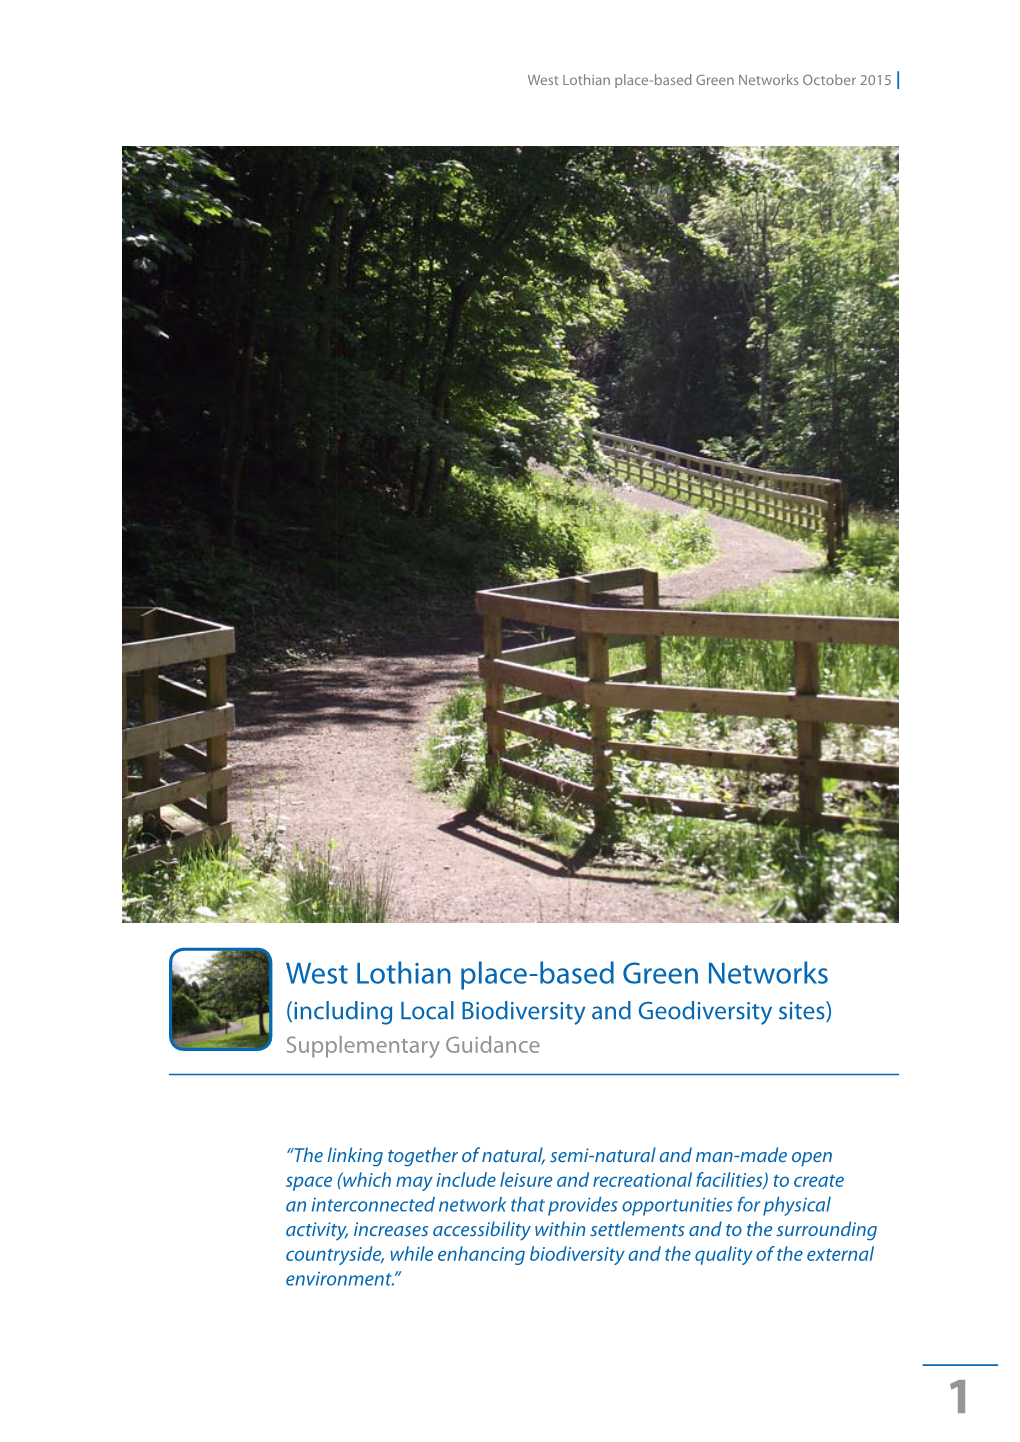 West Lothian Place-Based Green Networks October 2015